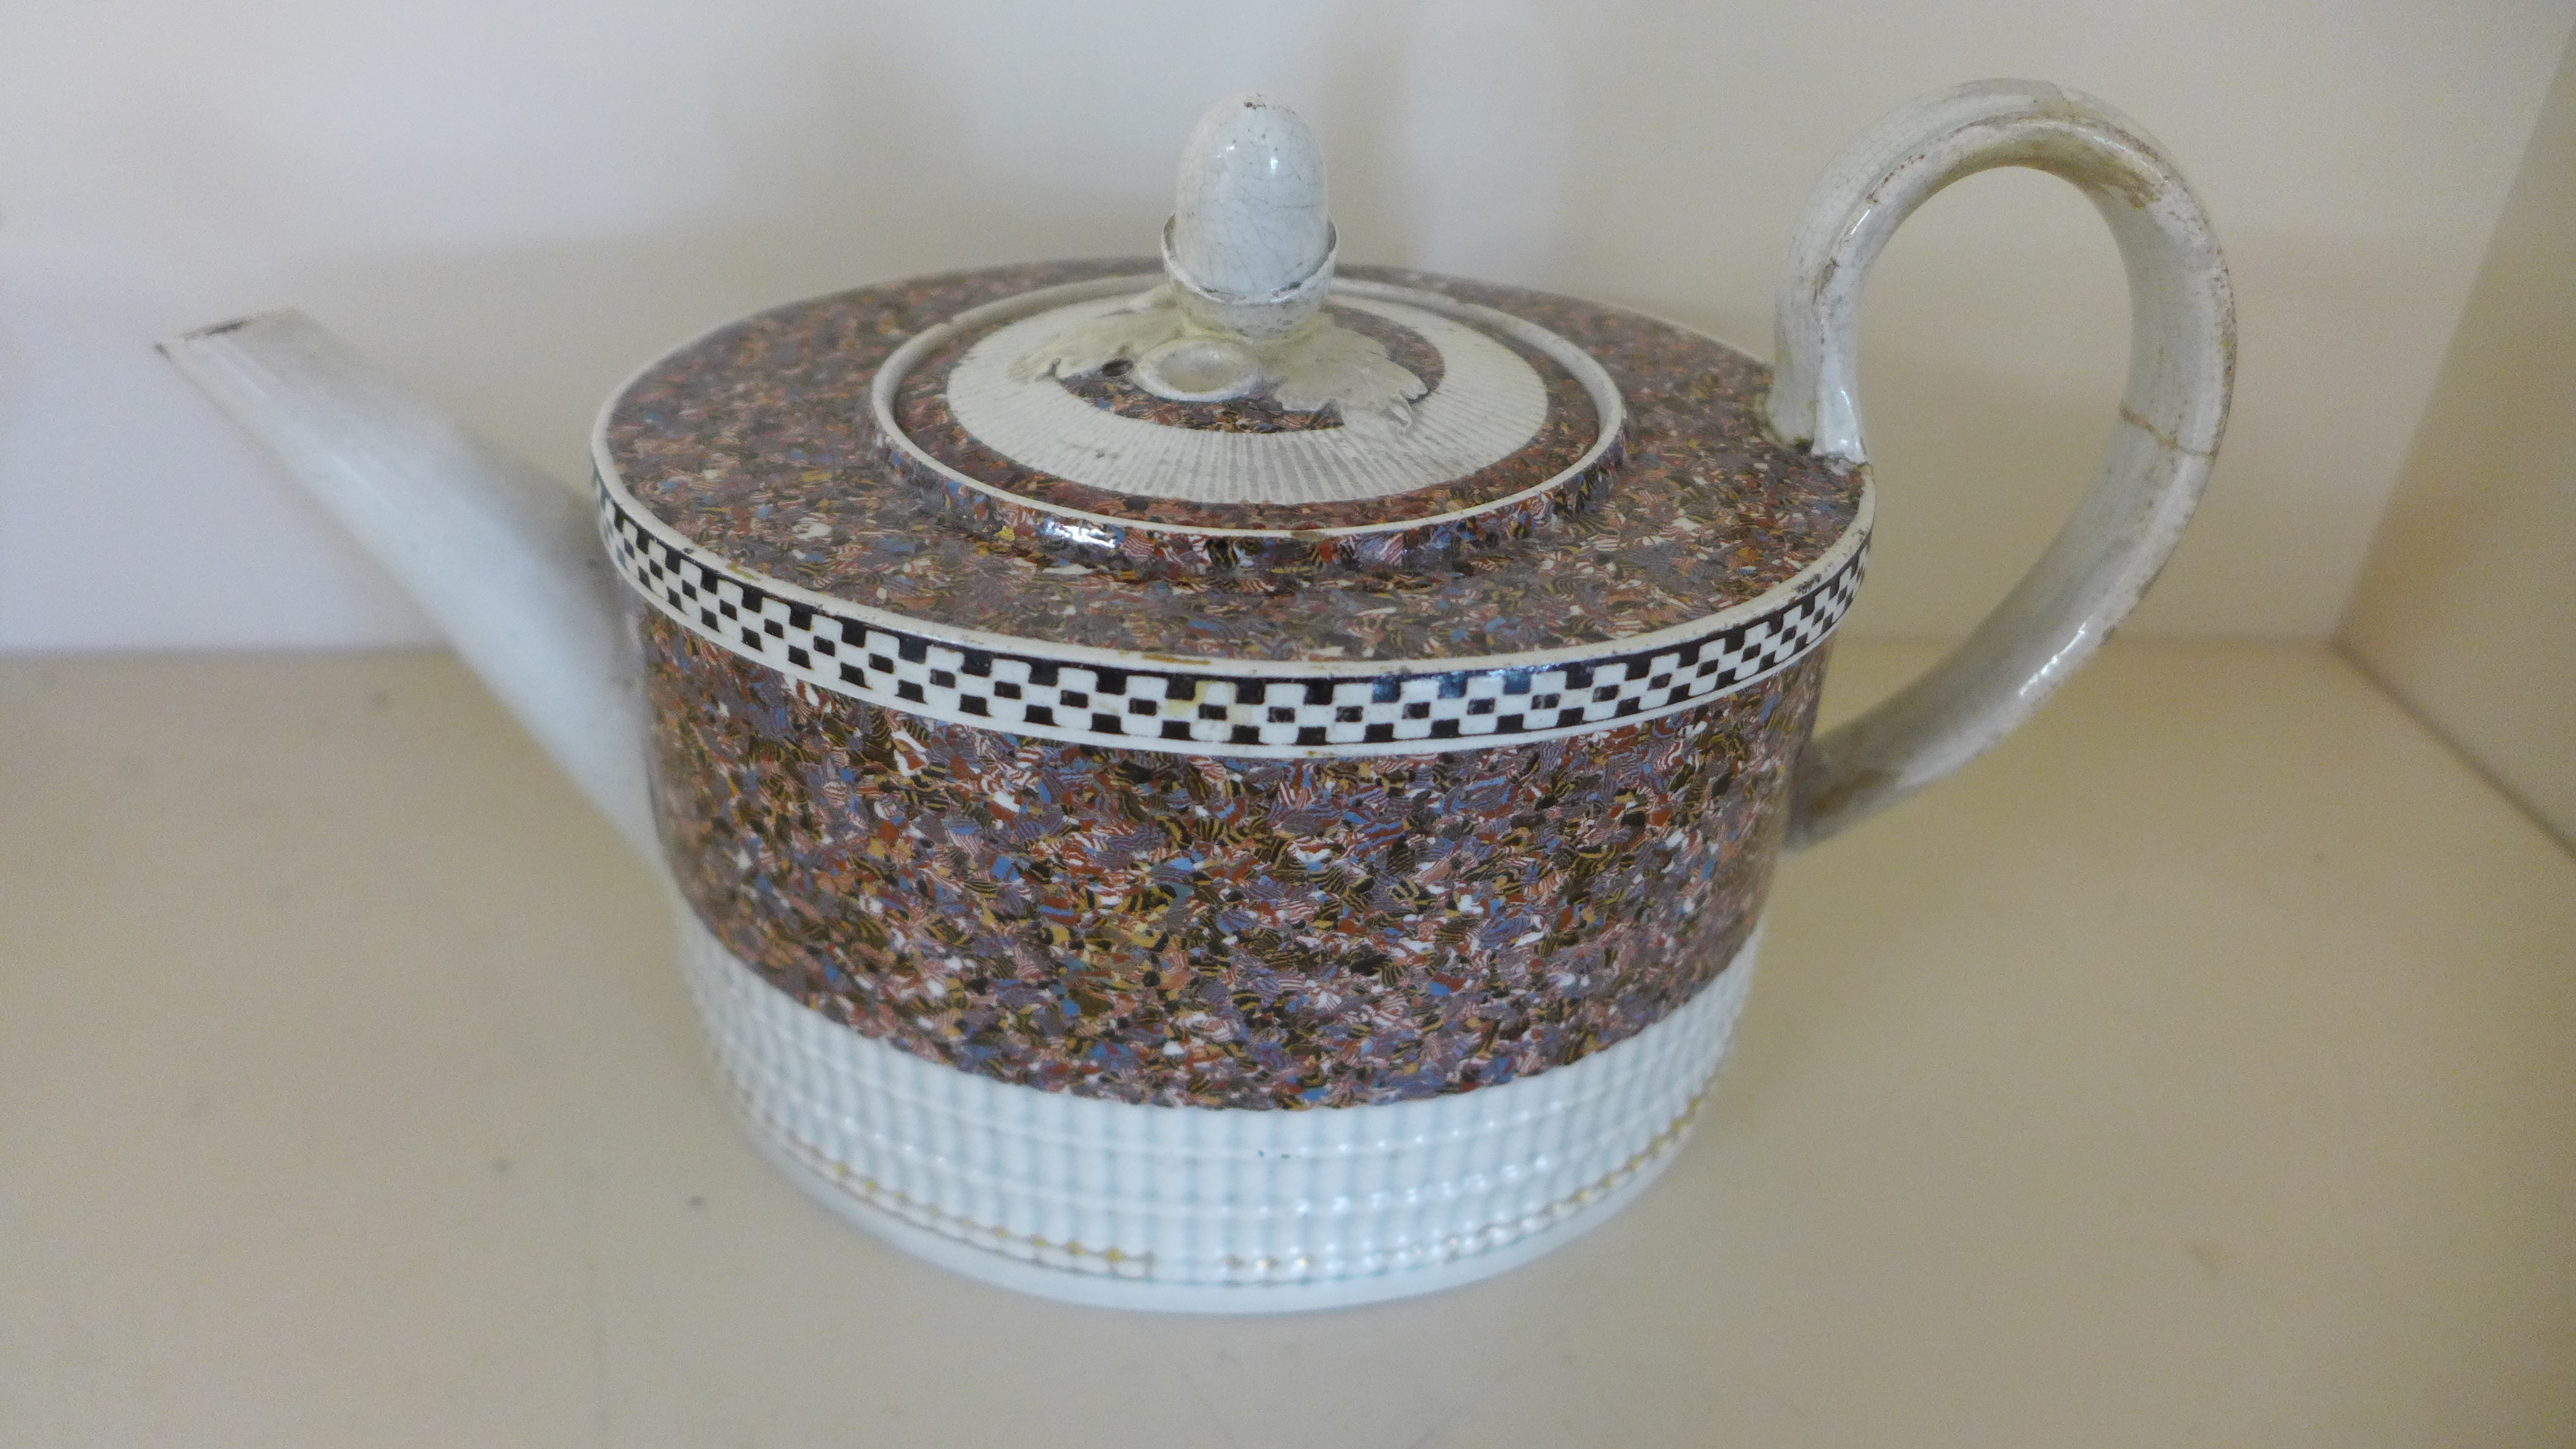 An 18th century teapot with marbalized decoration possibly Leeds - restoration to lid and handle -